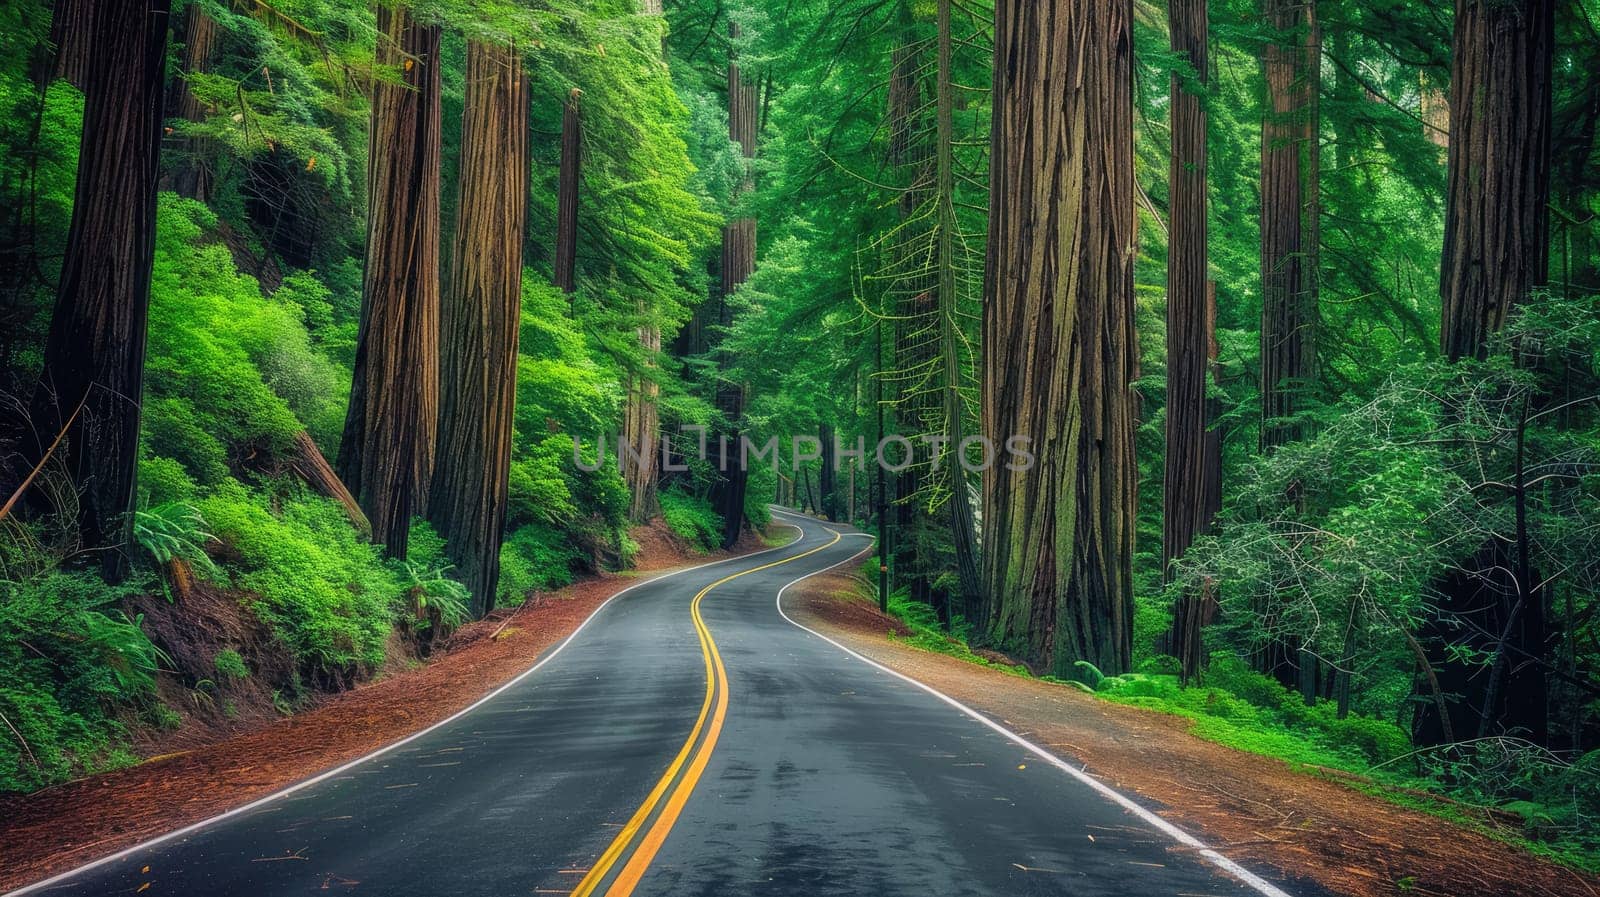 A road surrounded by redwood trees, Calm and serene beauty.